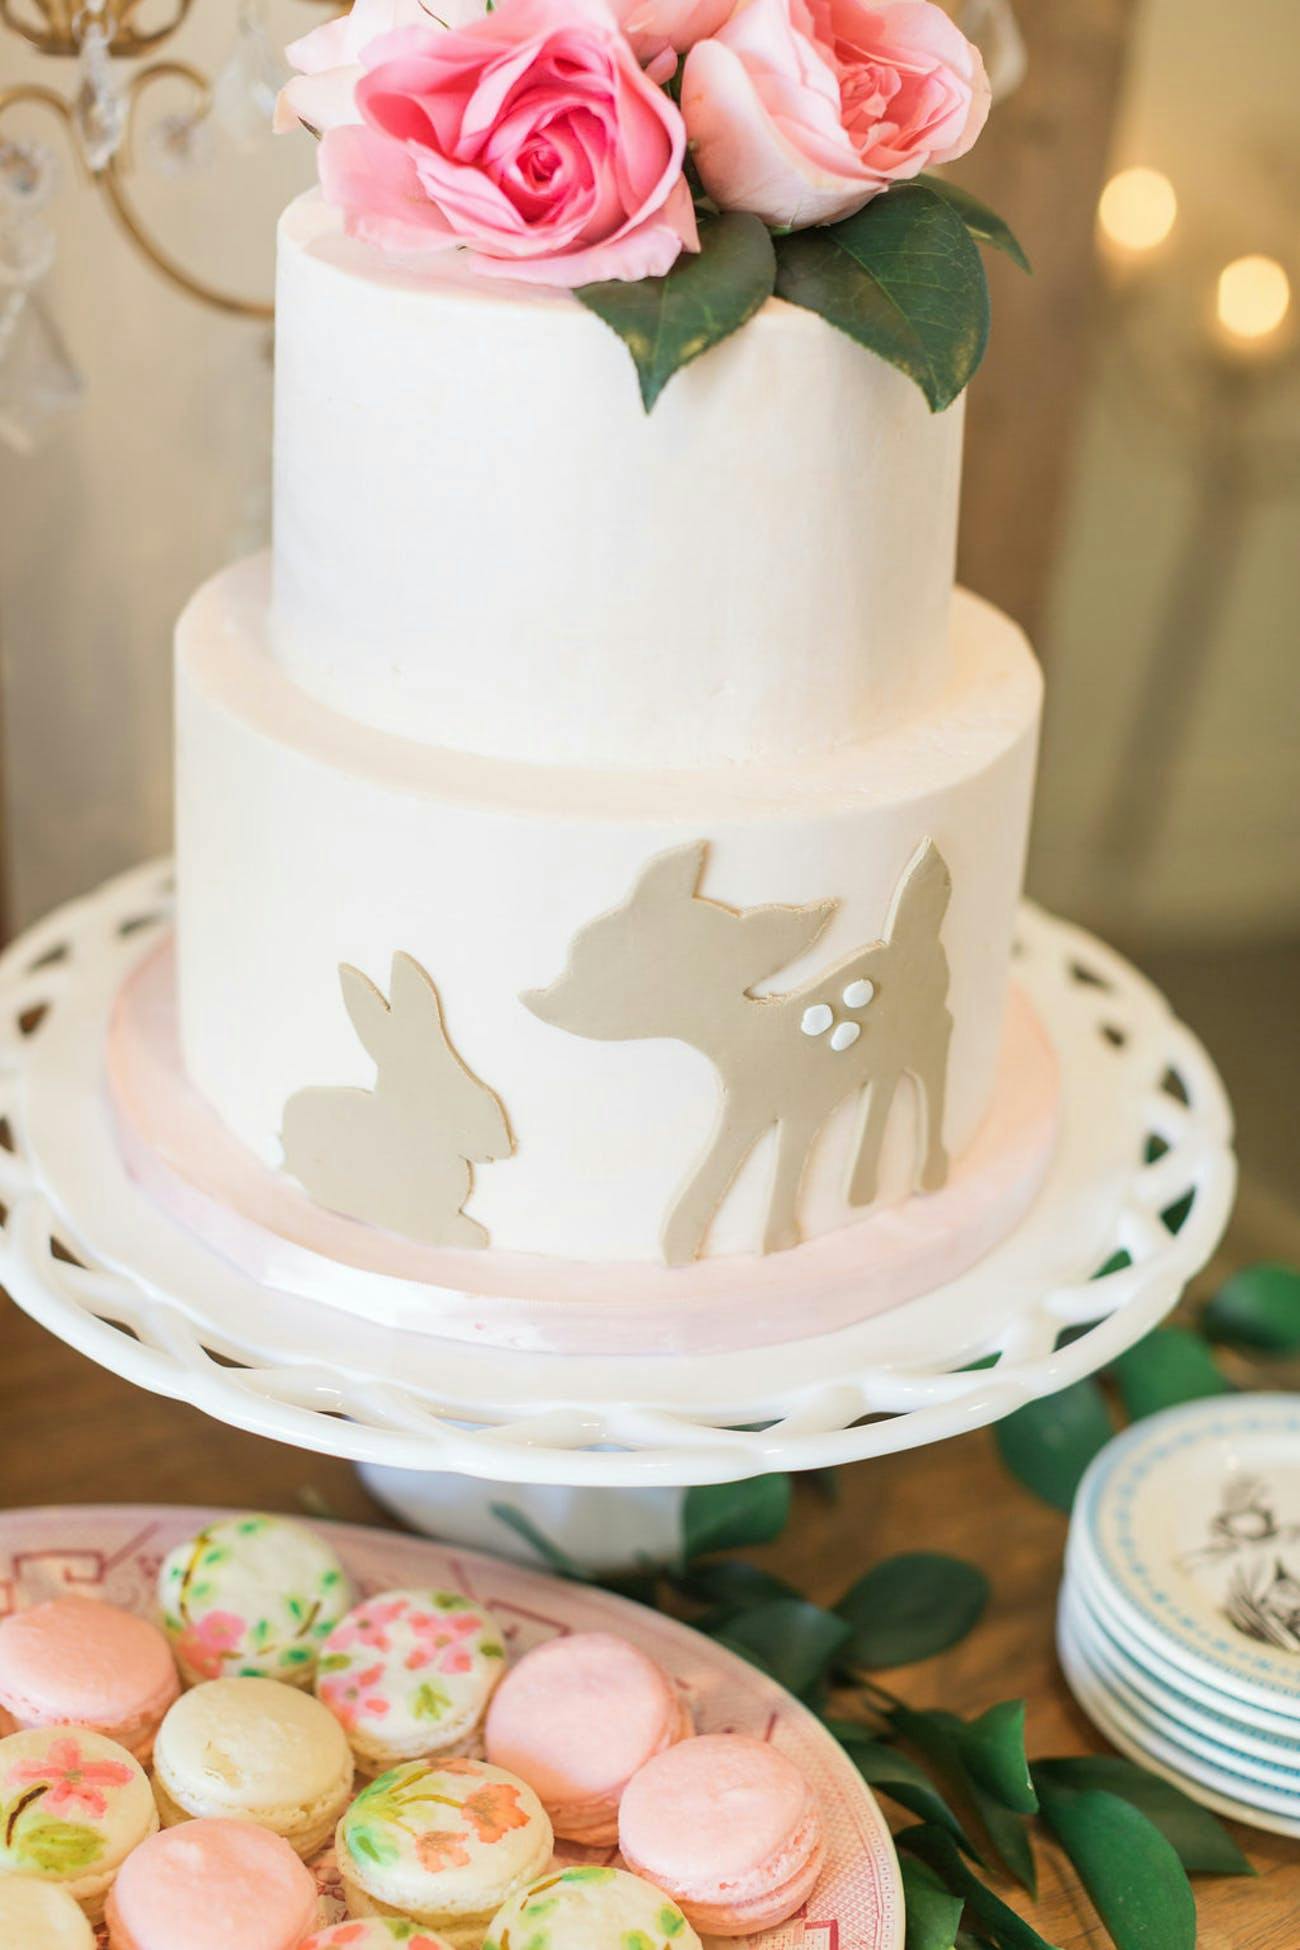 Two Tiered Cake with Baby Animals and a Pink Rose